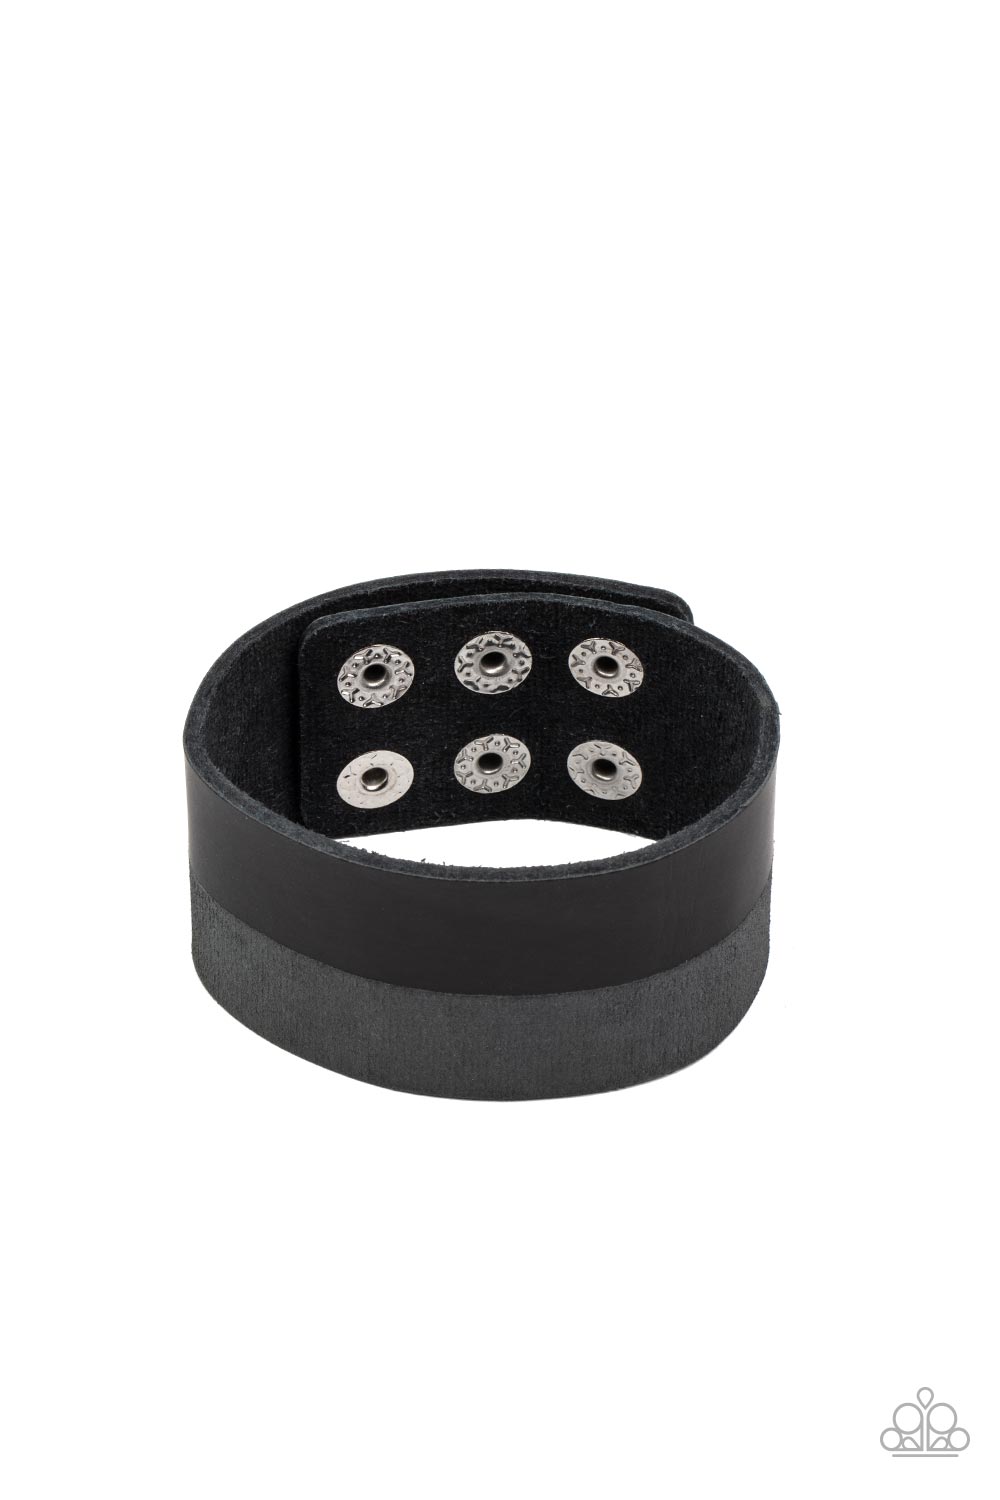 Edgy layers of black and gray leather wrap around the wrist